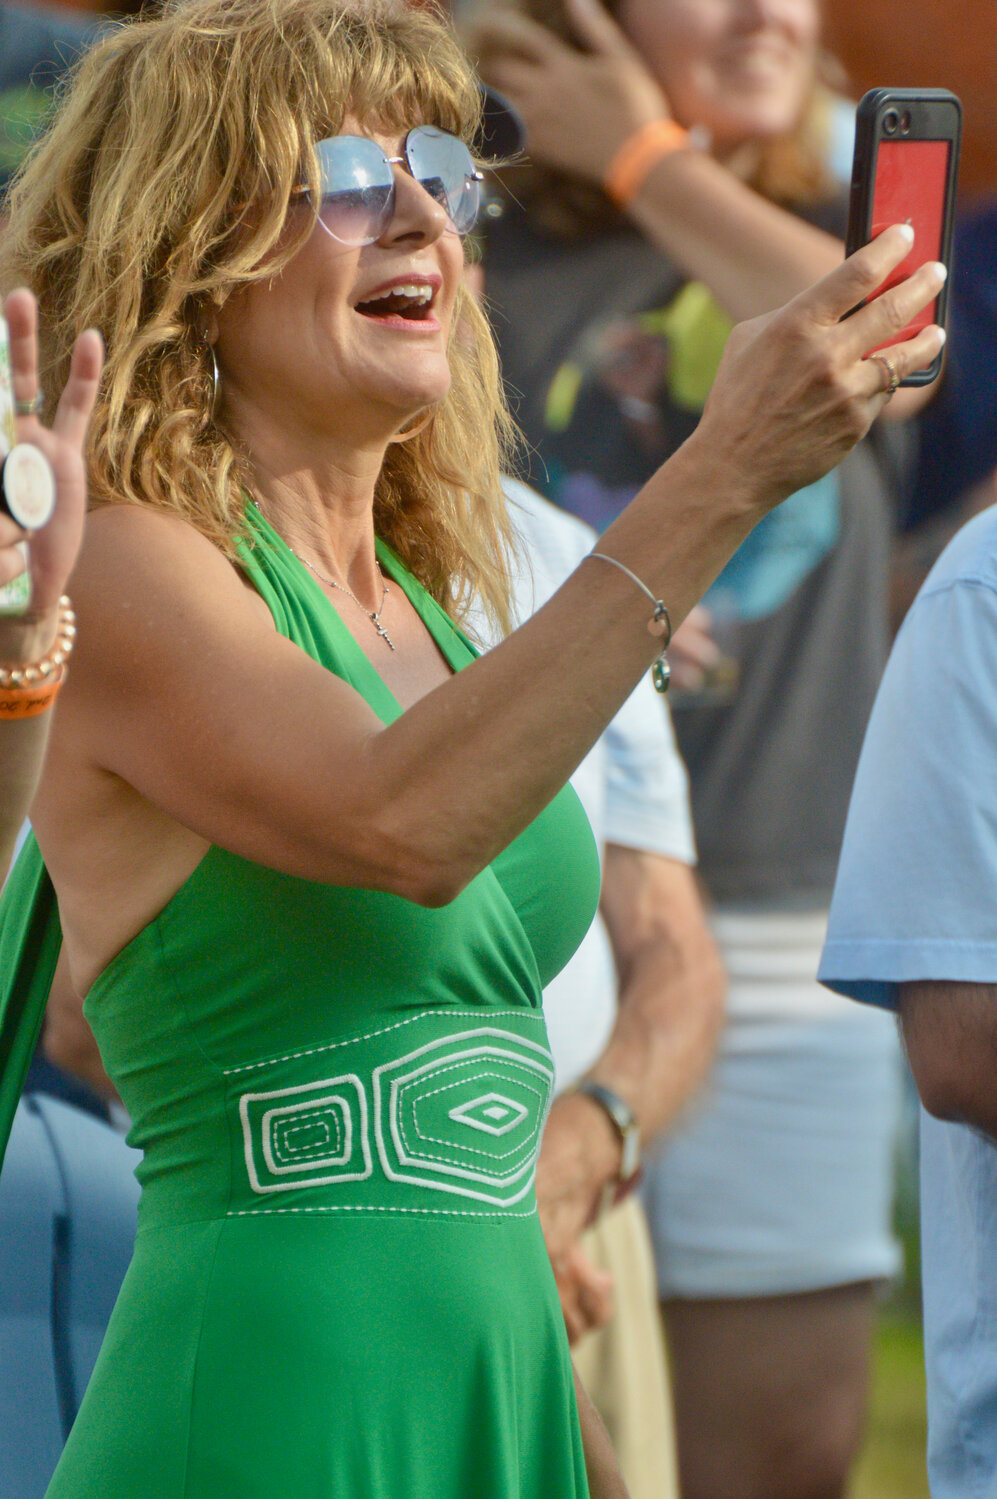 Suzanne Kekligian takes a video of Jimmy Buffett performing from in front of the stage.